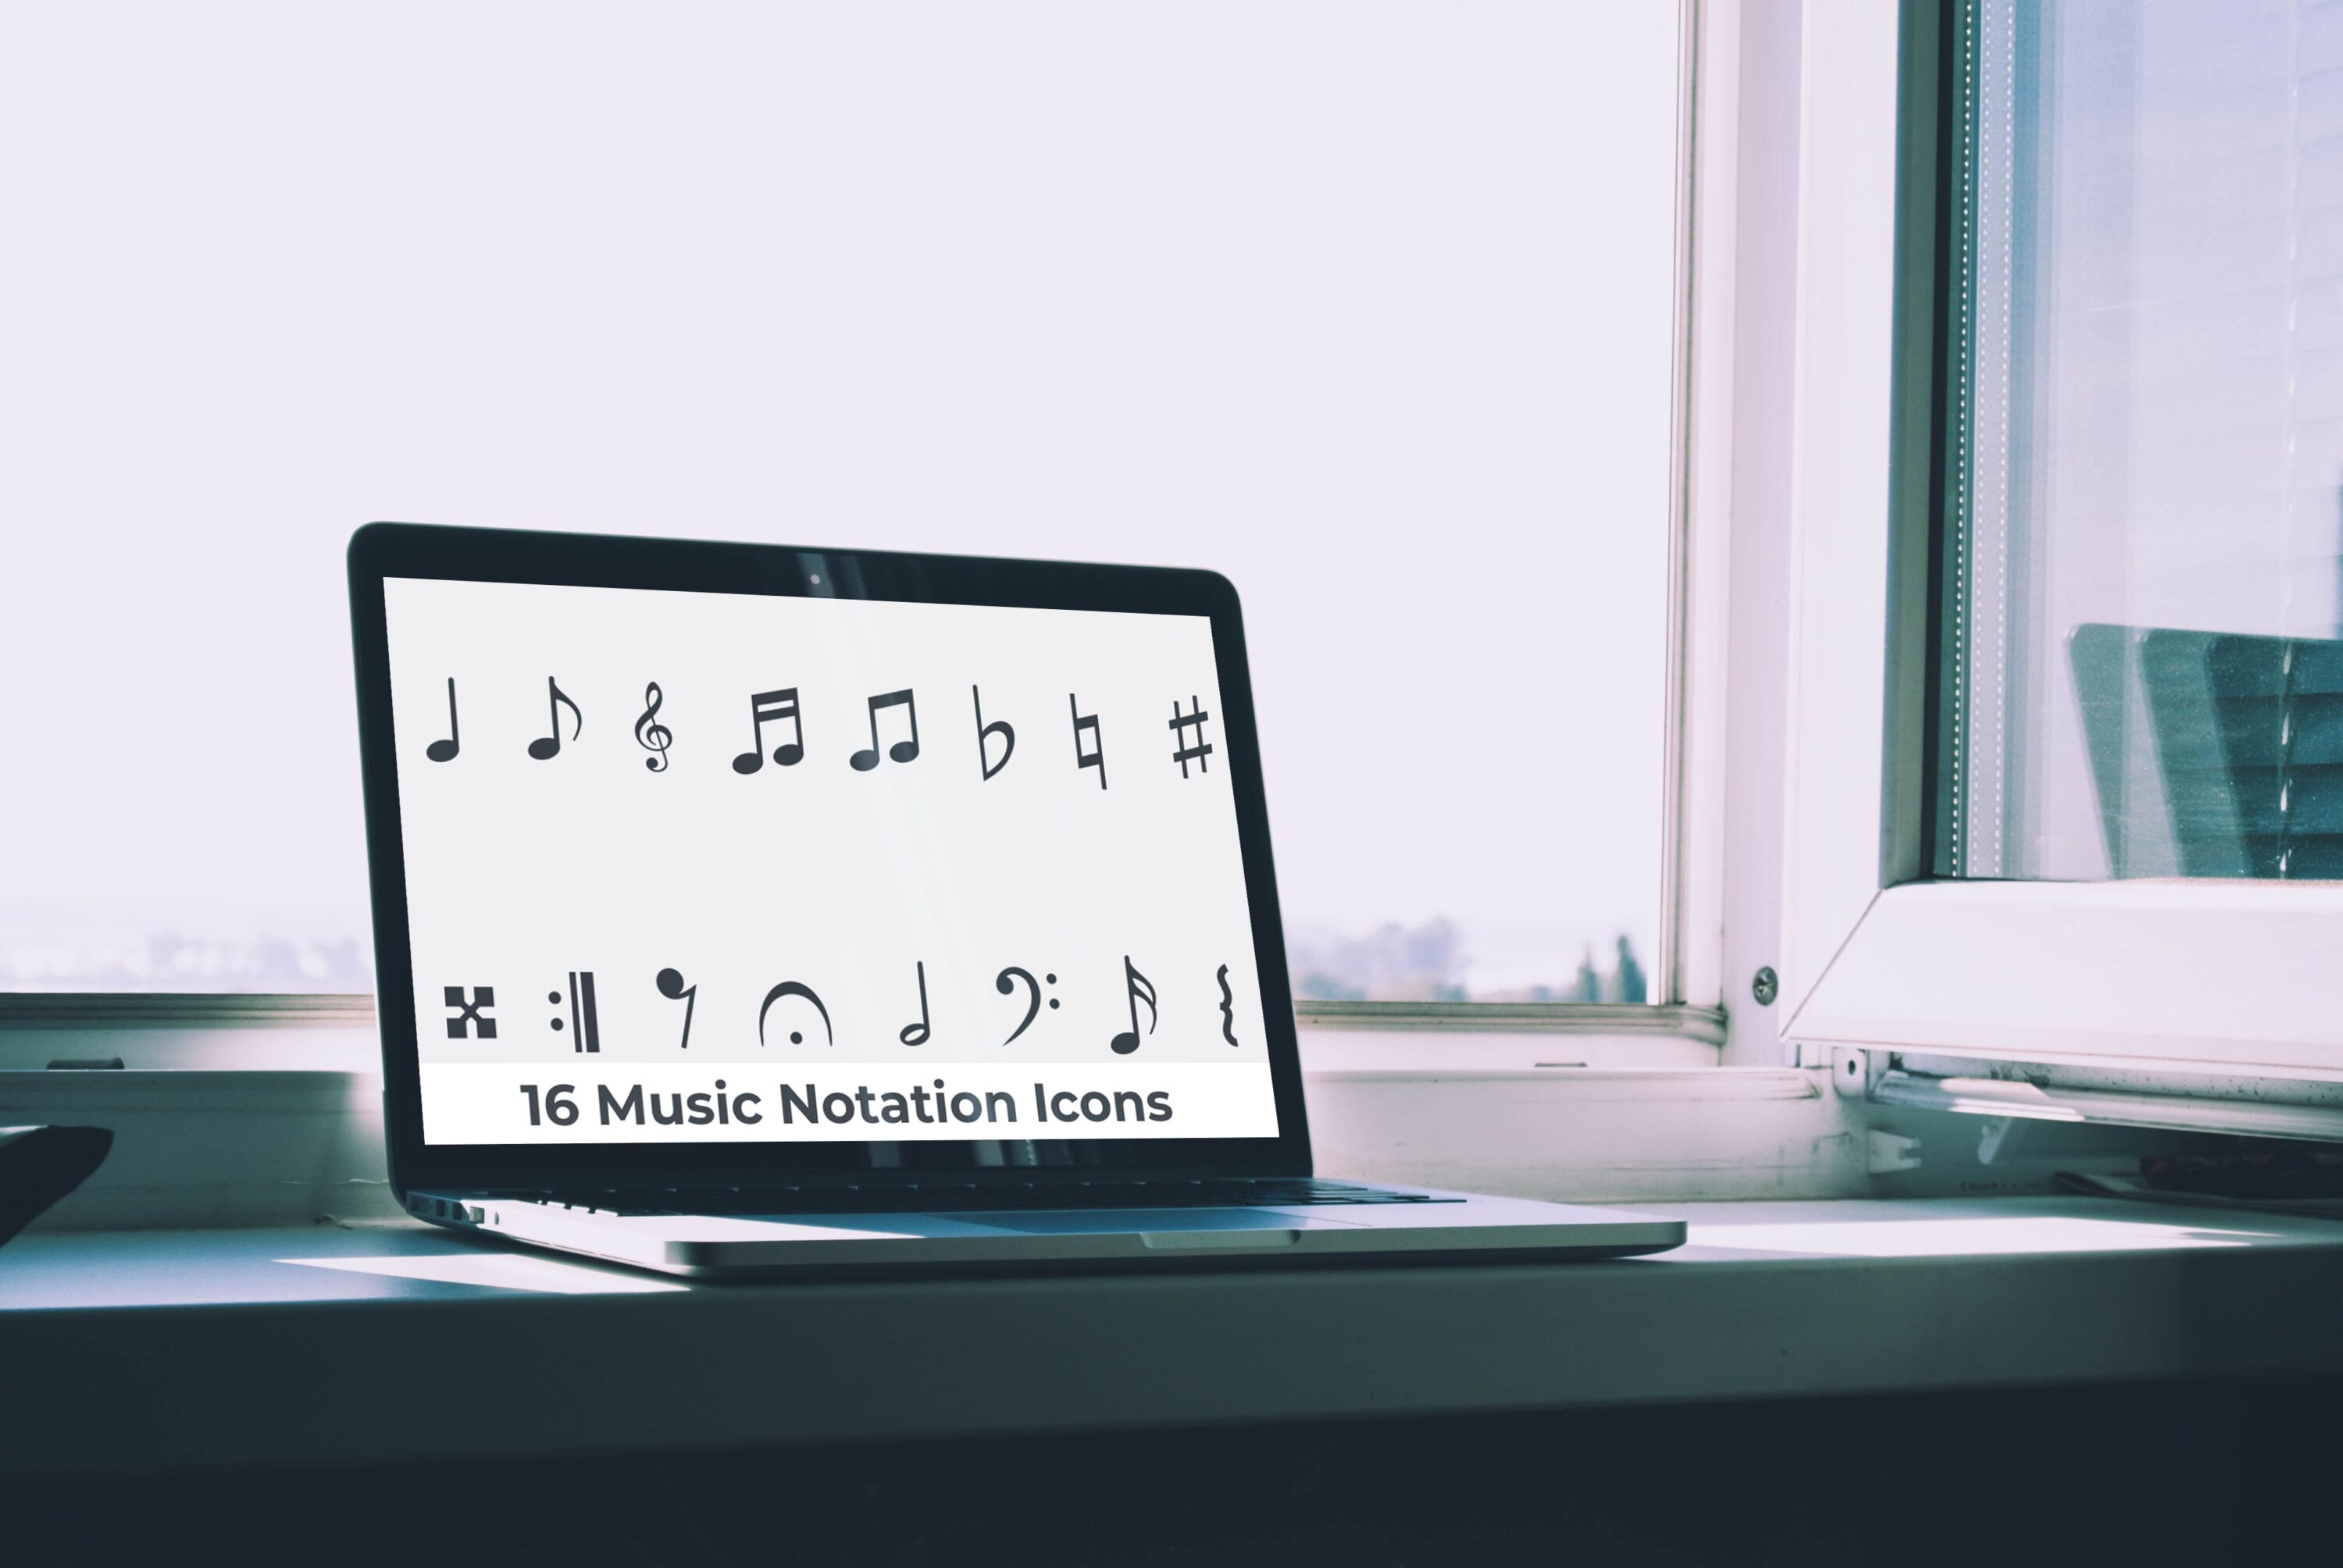 Laptop option of the 16 Music Notation Icons.